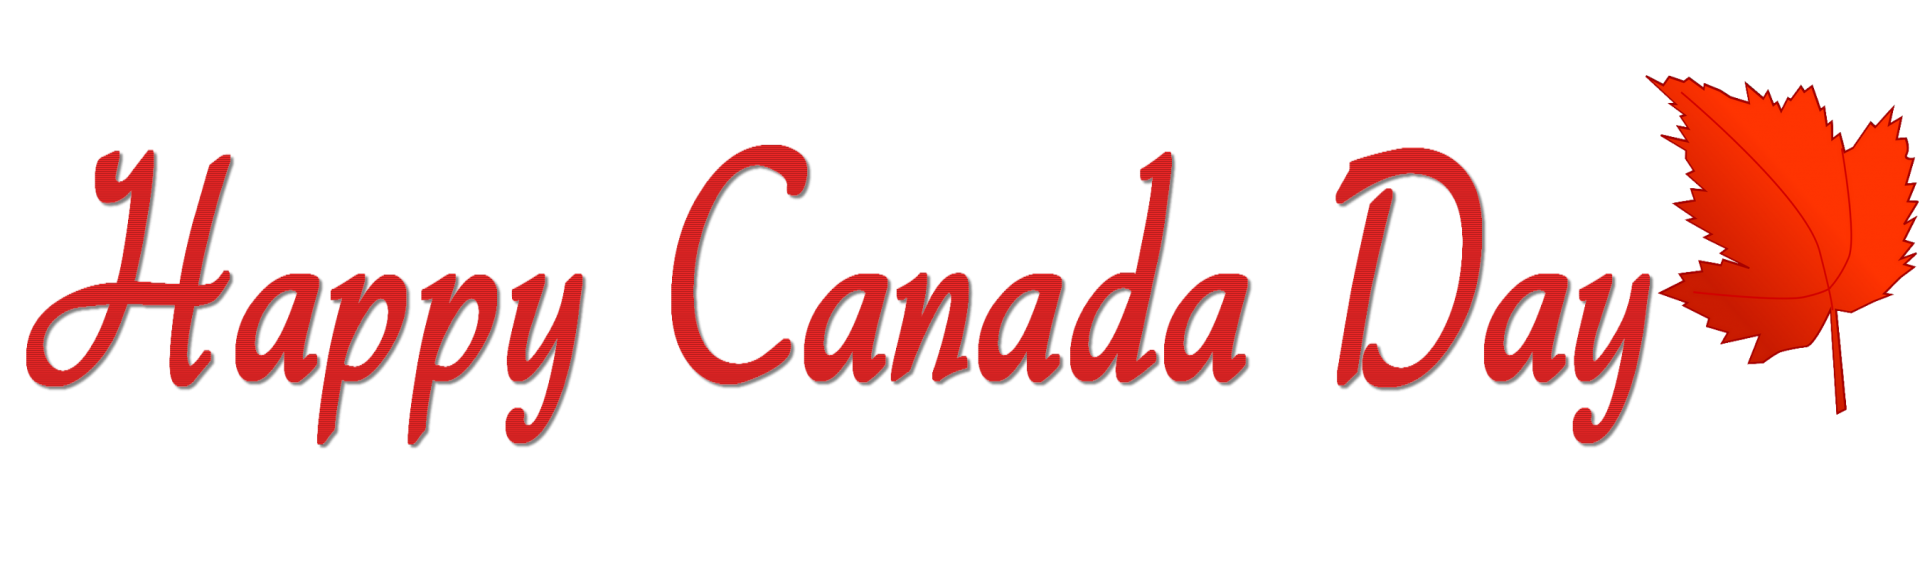 Canada Day Canadian Holidays Federal and Provincial statutory holiday